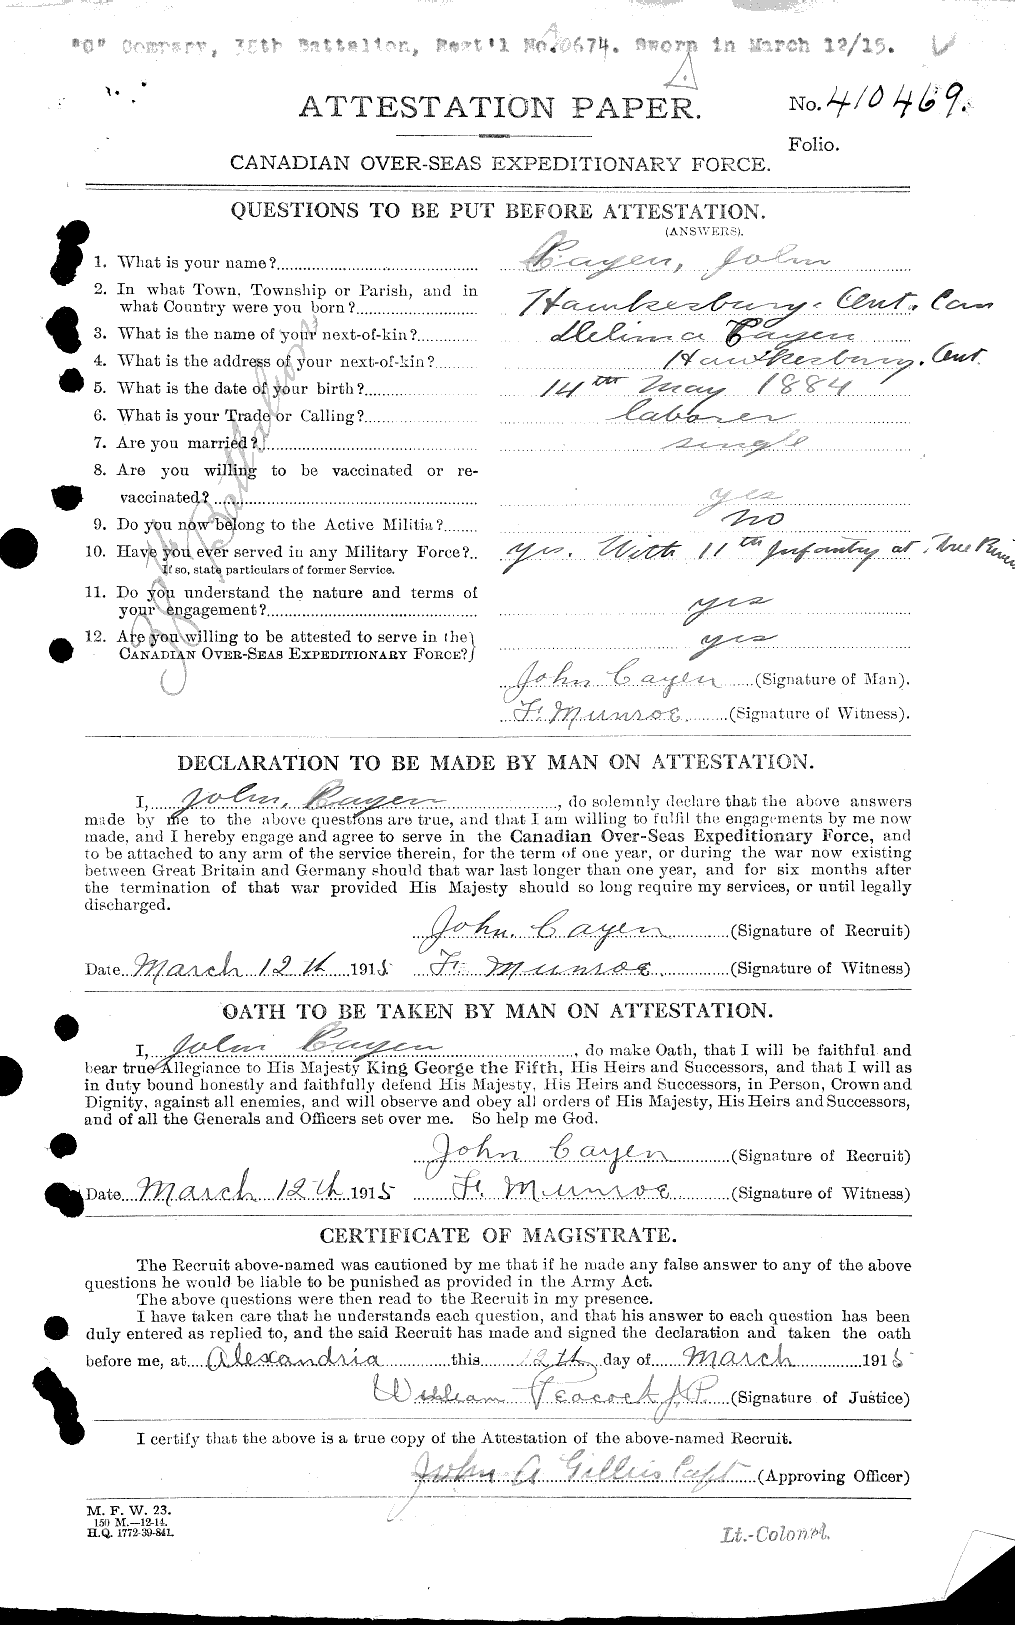 Personnel Records of the First World War - CEF 007650a